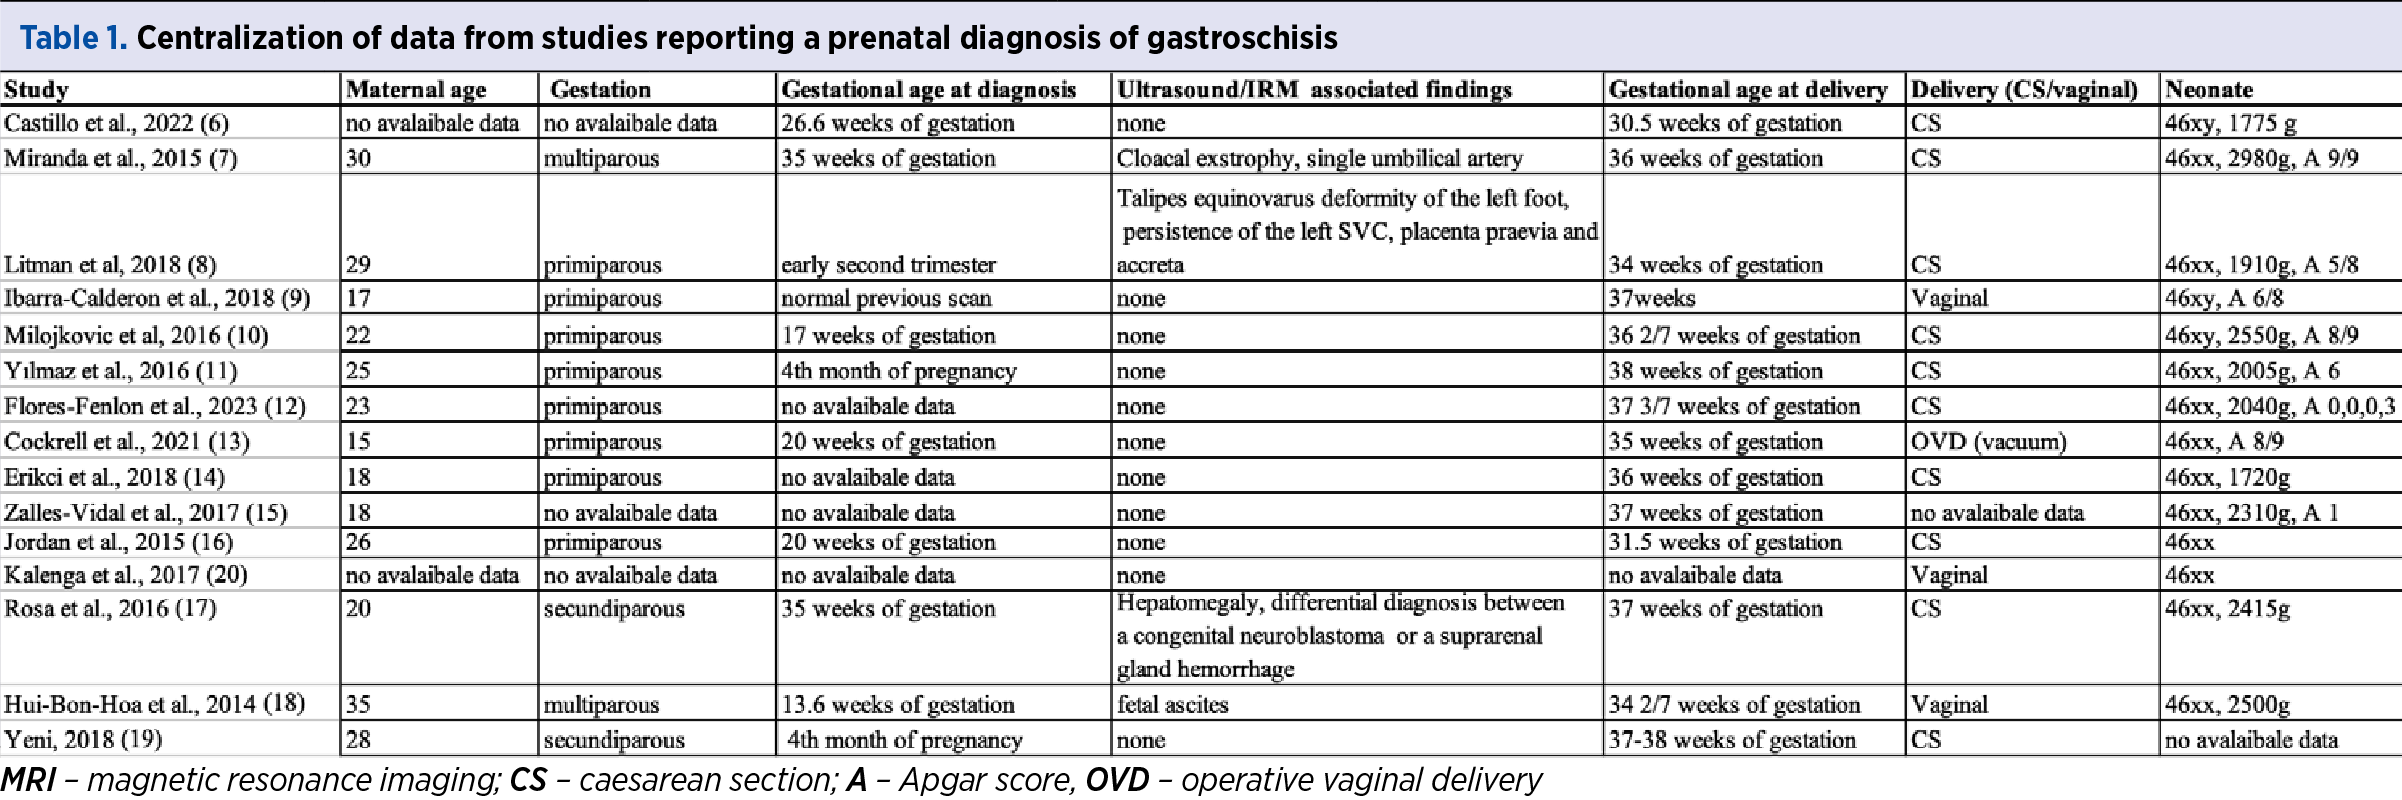 Table 1. Centralization of data from studies reporting a prenatal diagnosis of gastroschisis